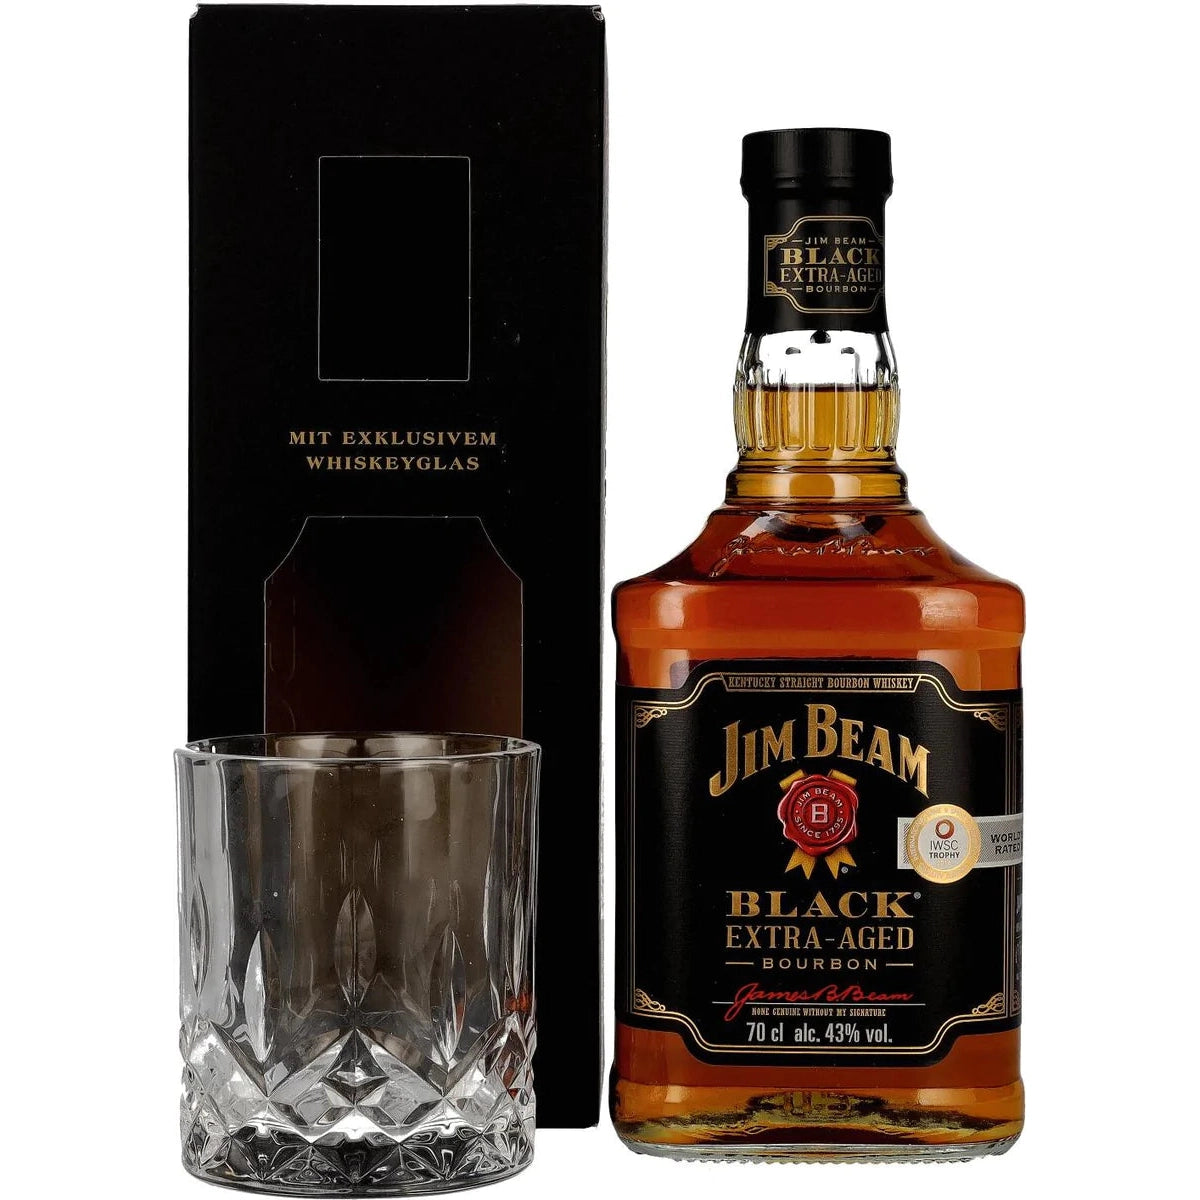 Jim 0,7l Beam 43% Giftbox in Vol. Extra-Aged with Bourbon BLACK glass